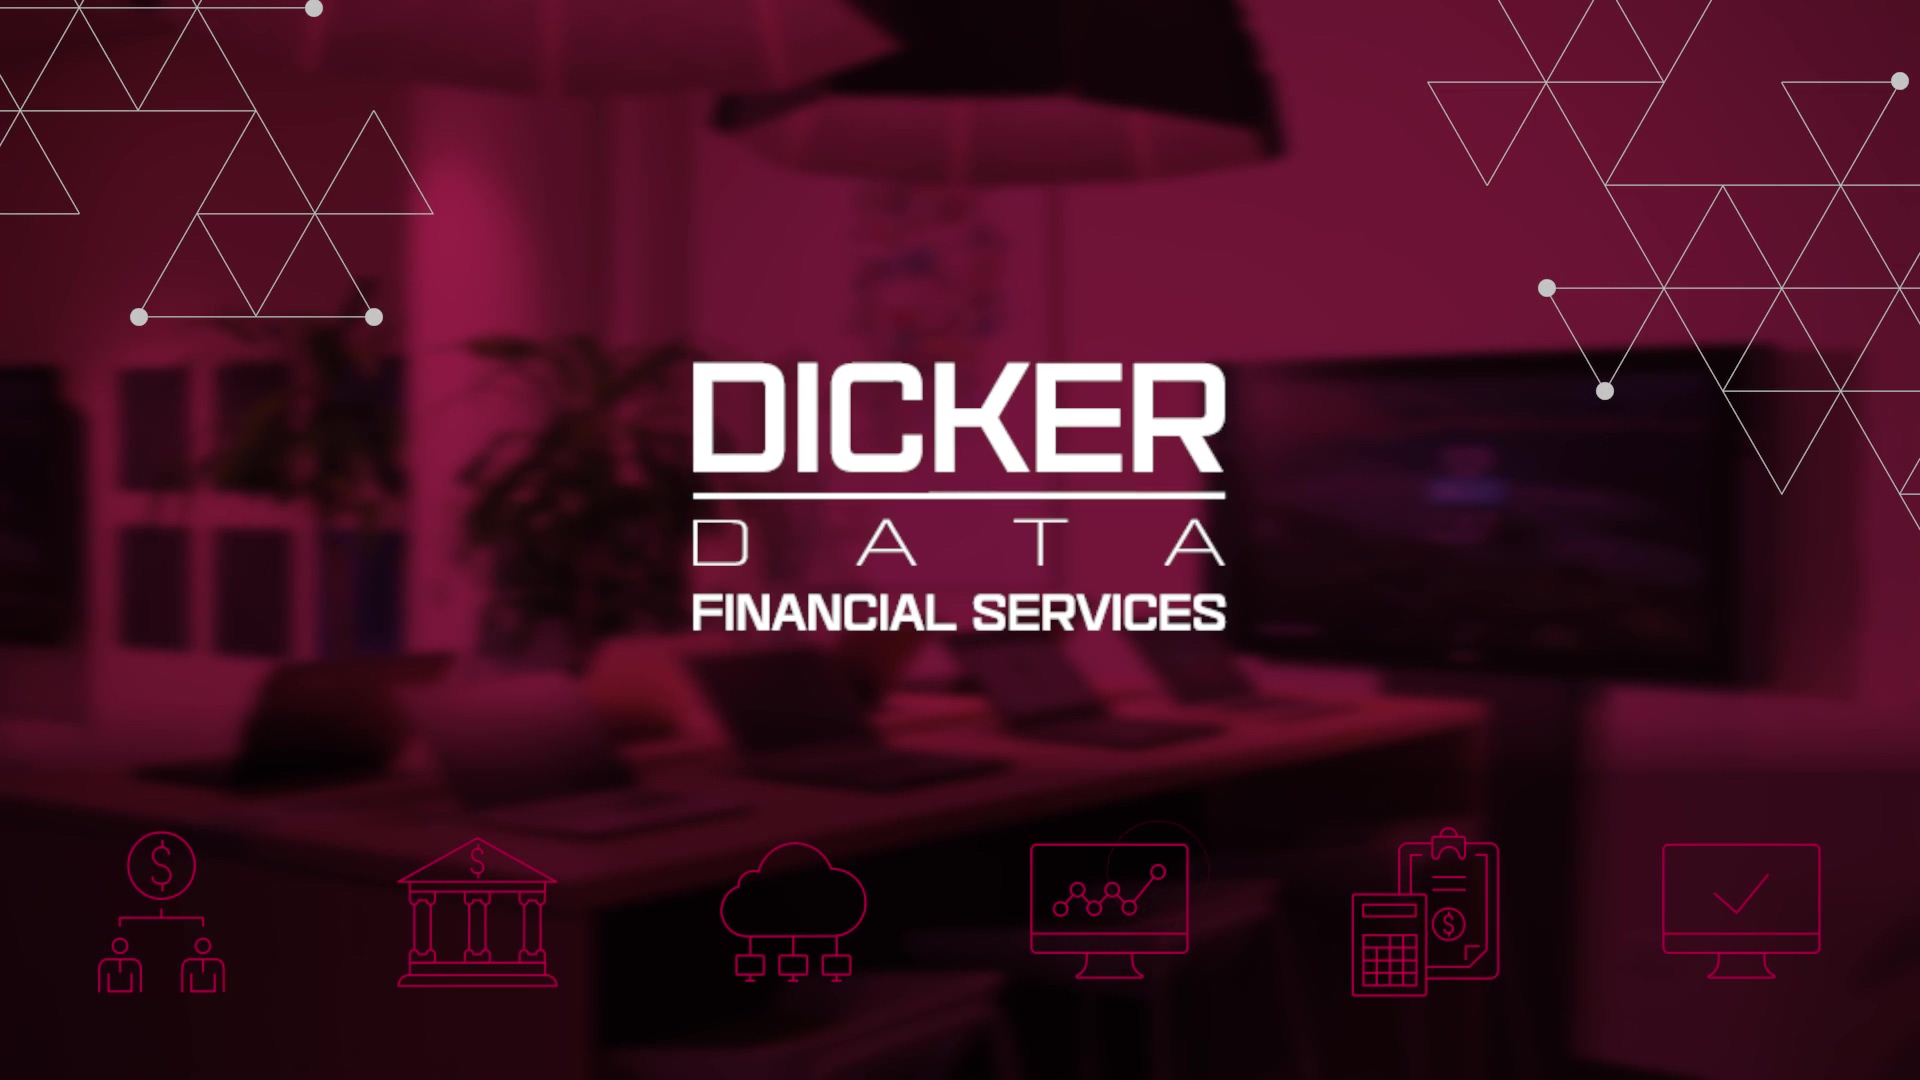 Dicker Data Financial Services Introduction